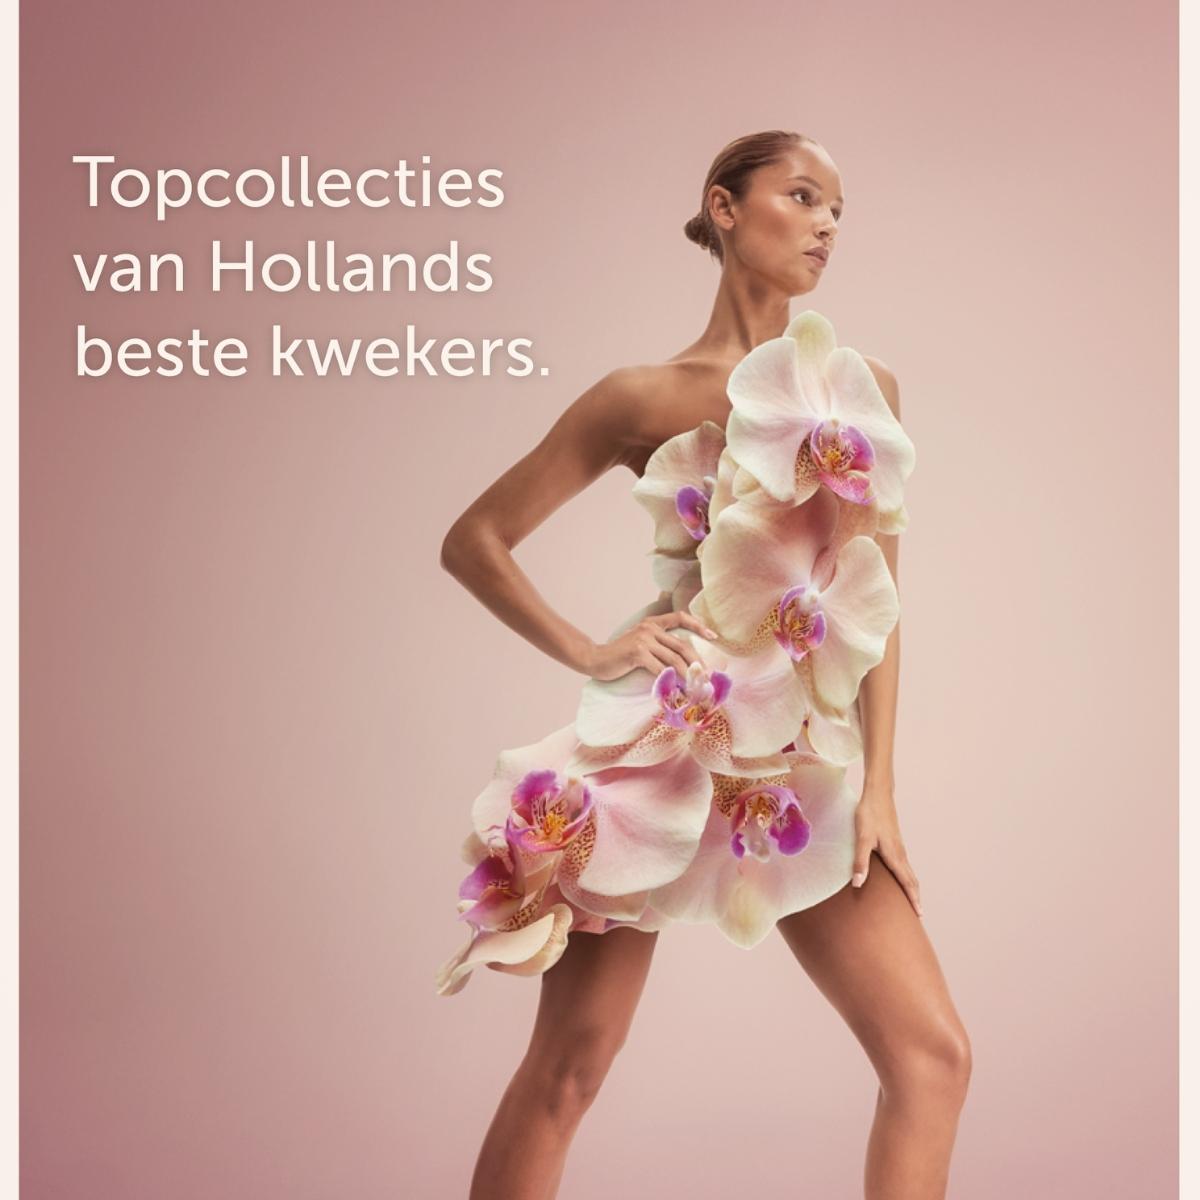 decorum-launched-their-new-campaign-at-the-trade-fair-aalsmeer-featured